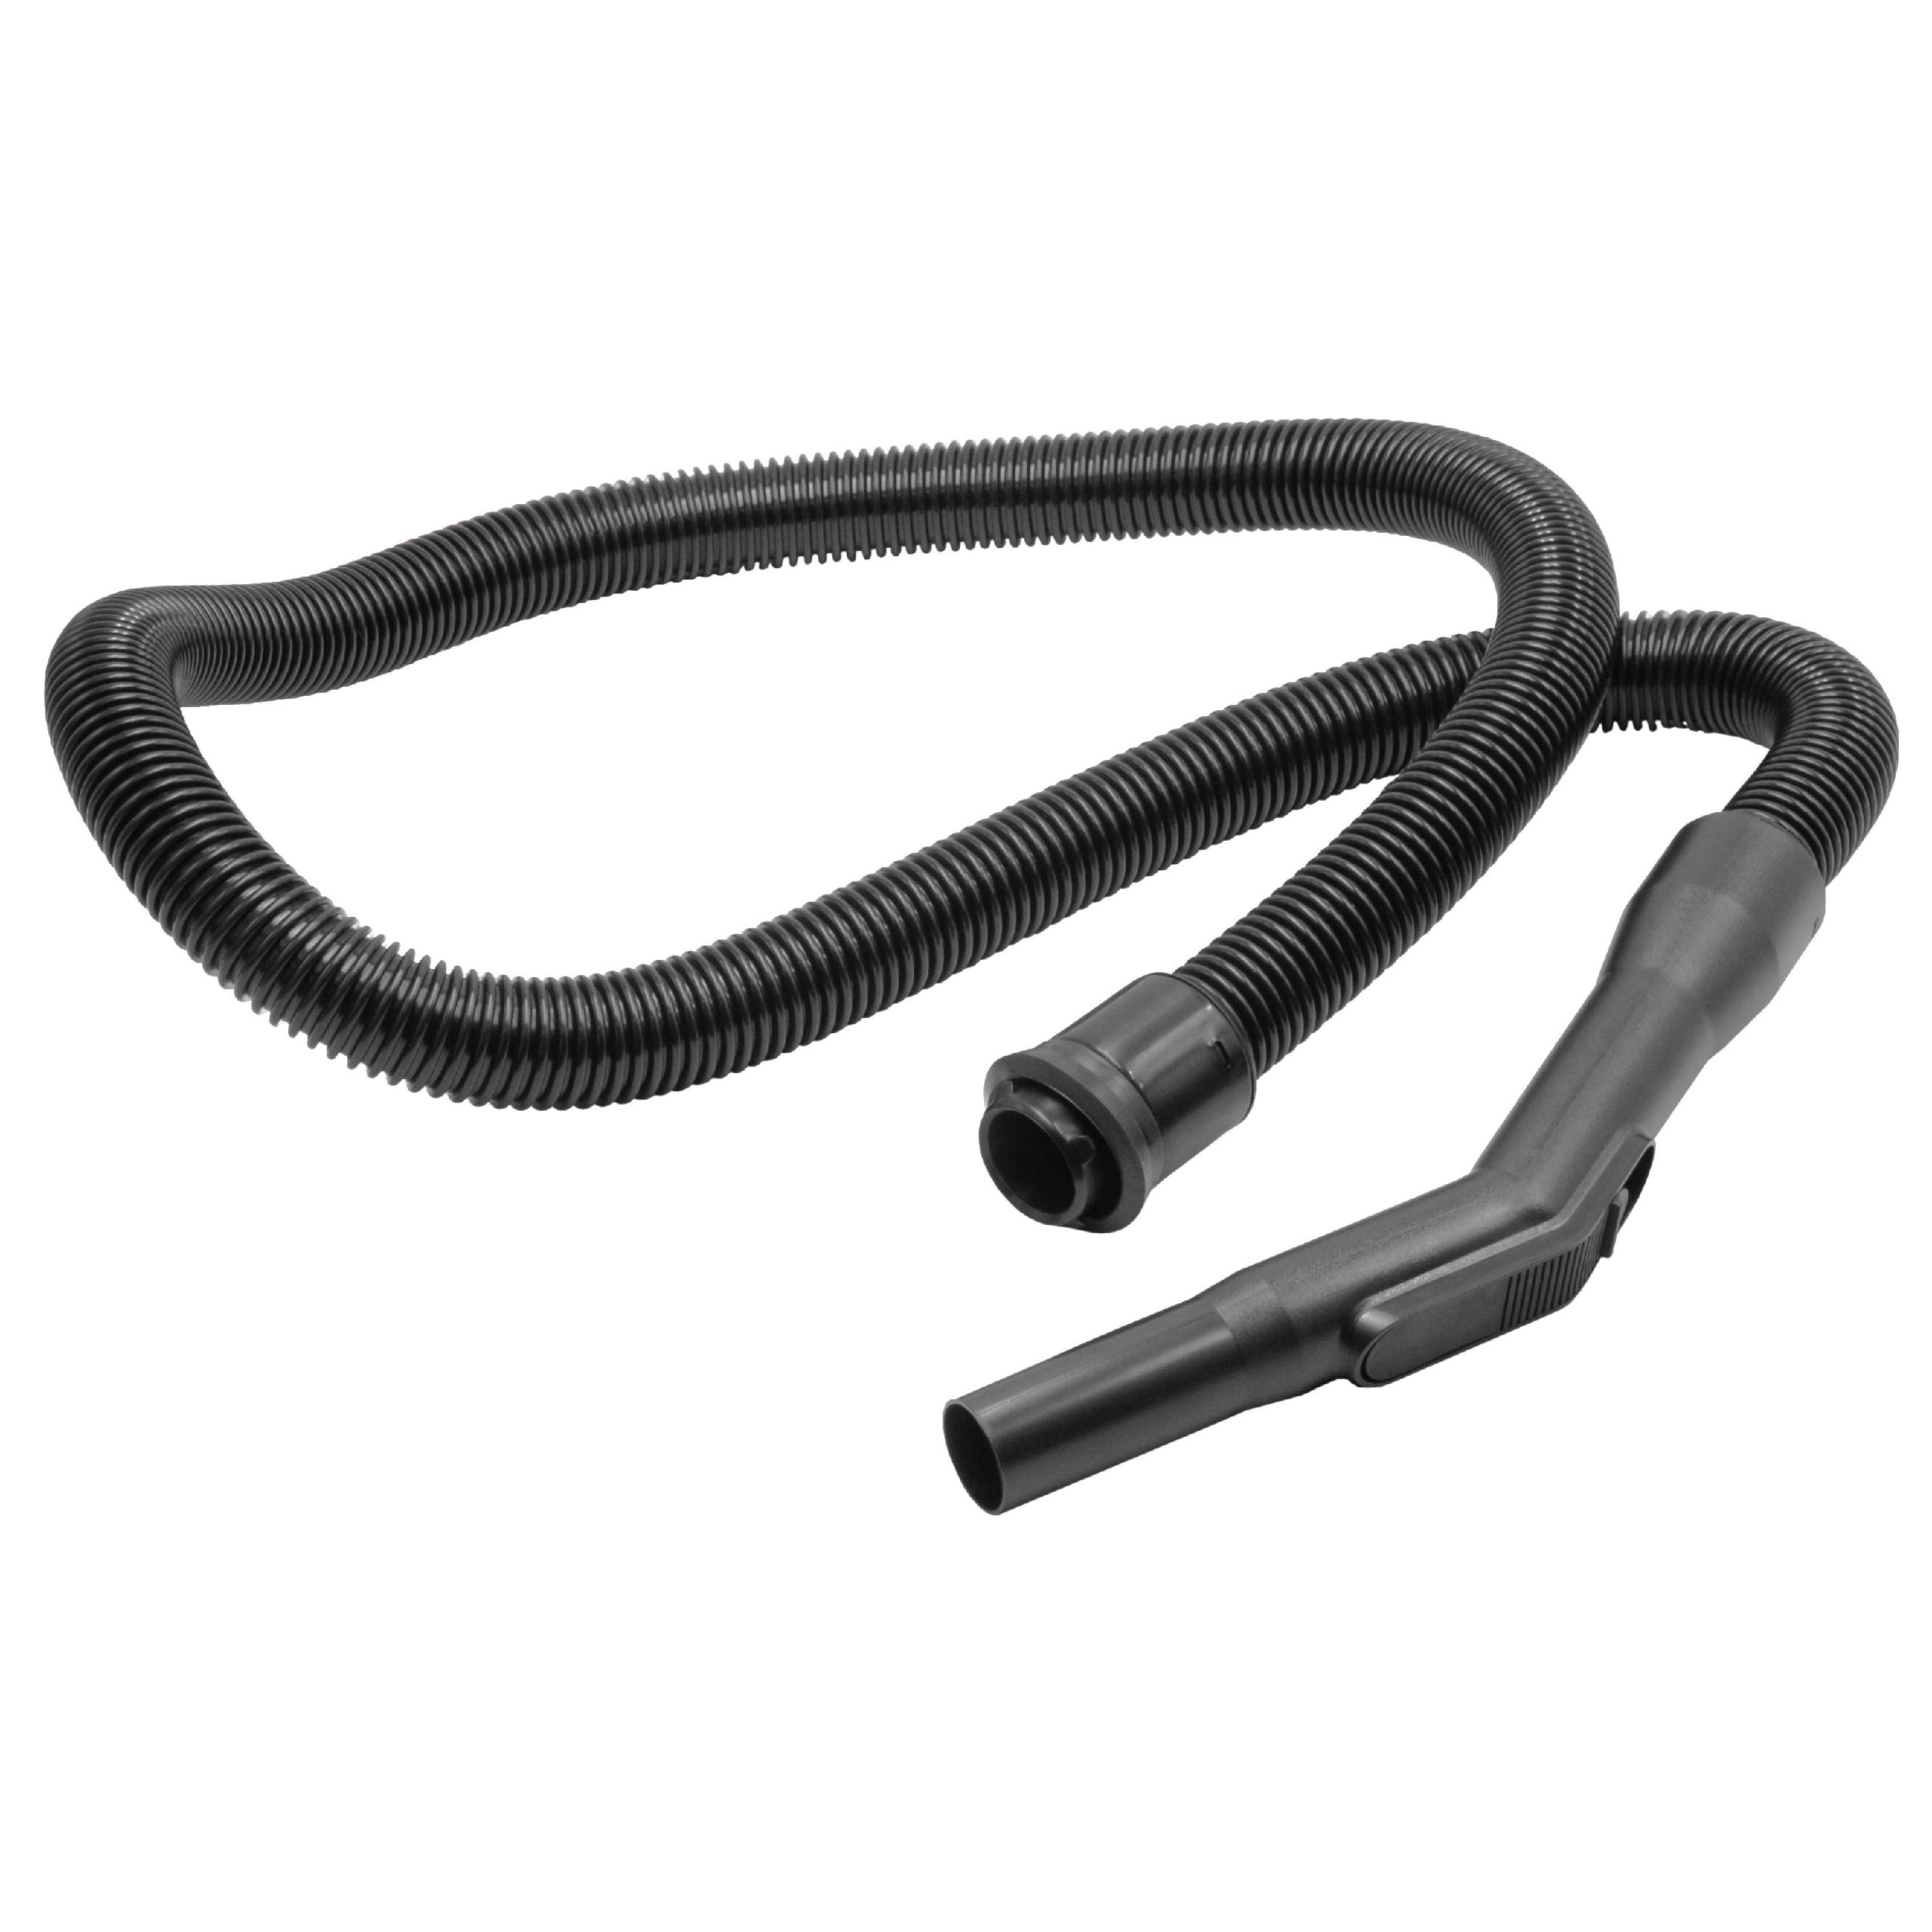 Hose suitable for Electrolux D 711 etc. - 213 cm long (with Handle), for ⌀ 32 mm Round Connector